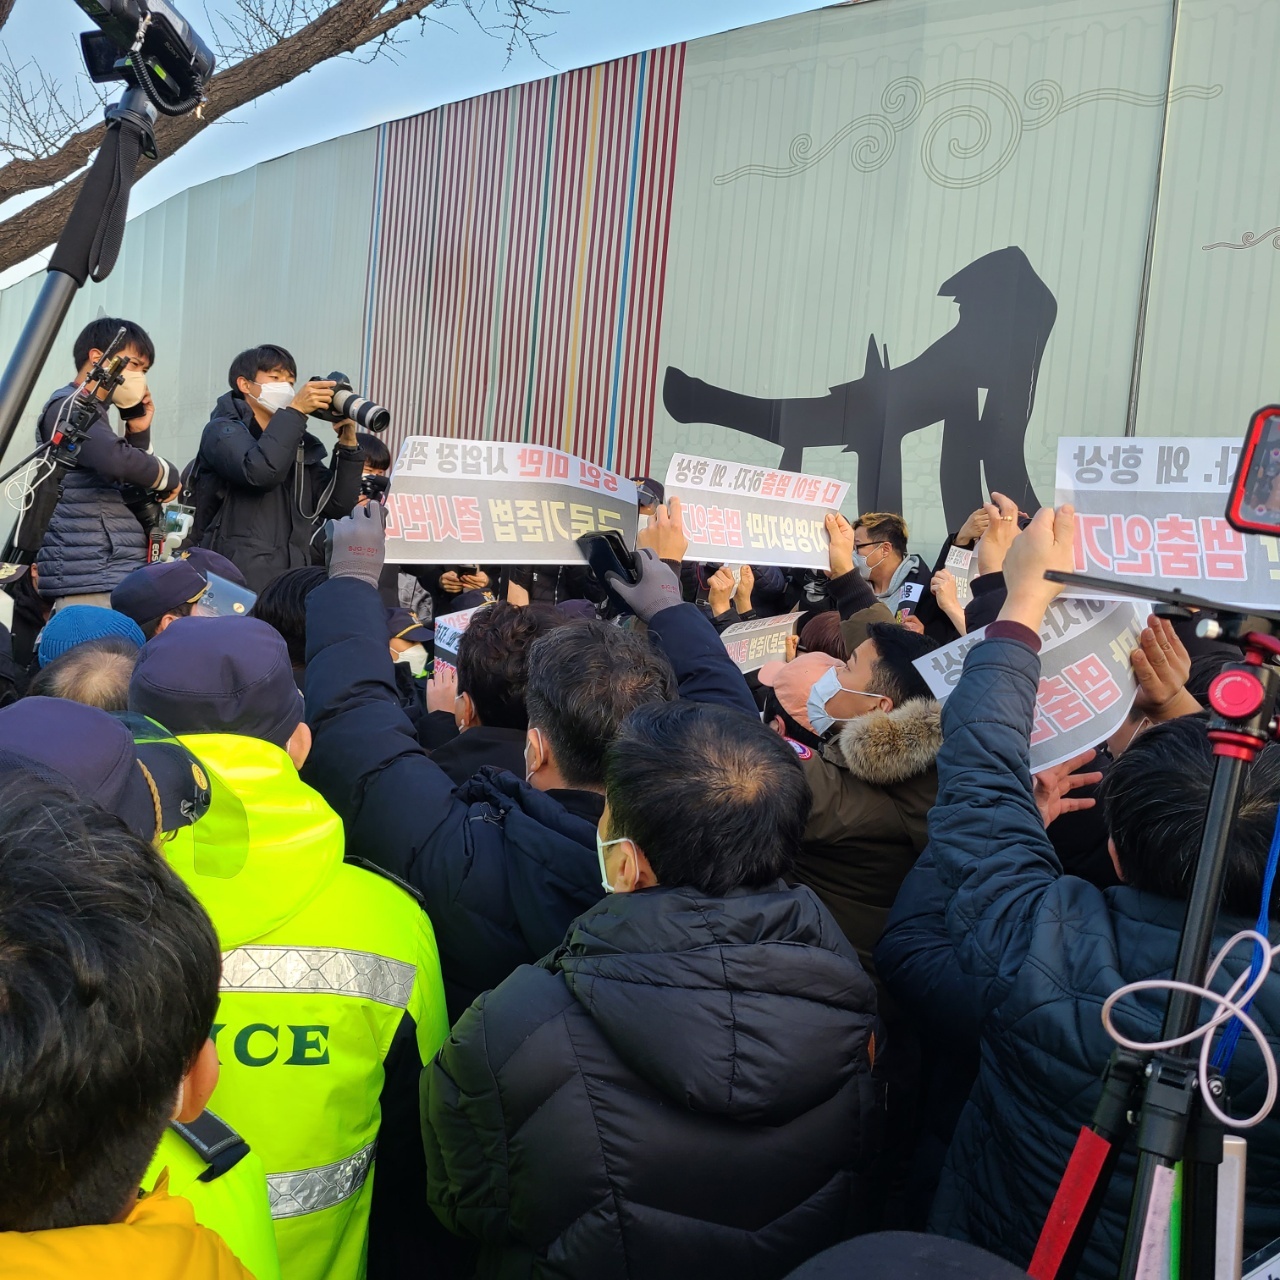 Protestors demanding entry clash with the police at barricades surrounding a protest held in Gwanghwamun, central Seoul, Wednesday. (The Korea Herald/Kang Jae-eun)